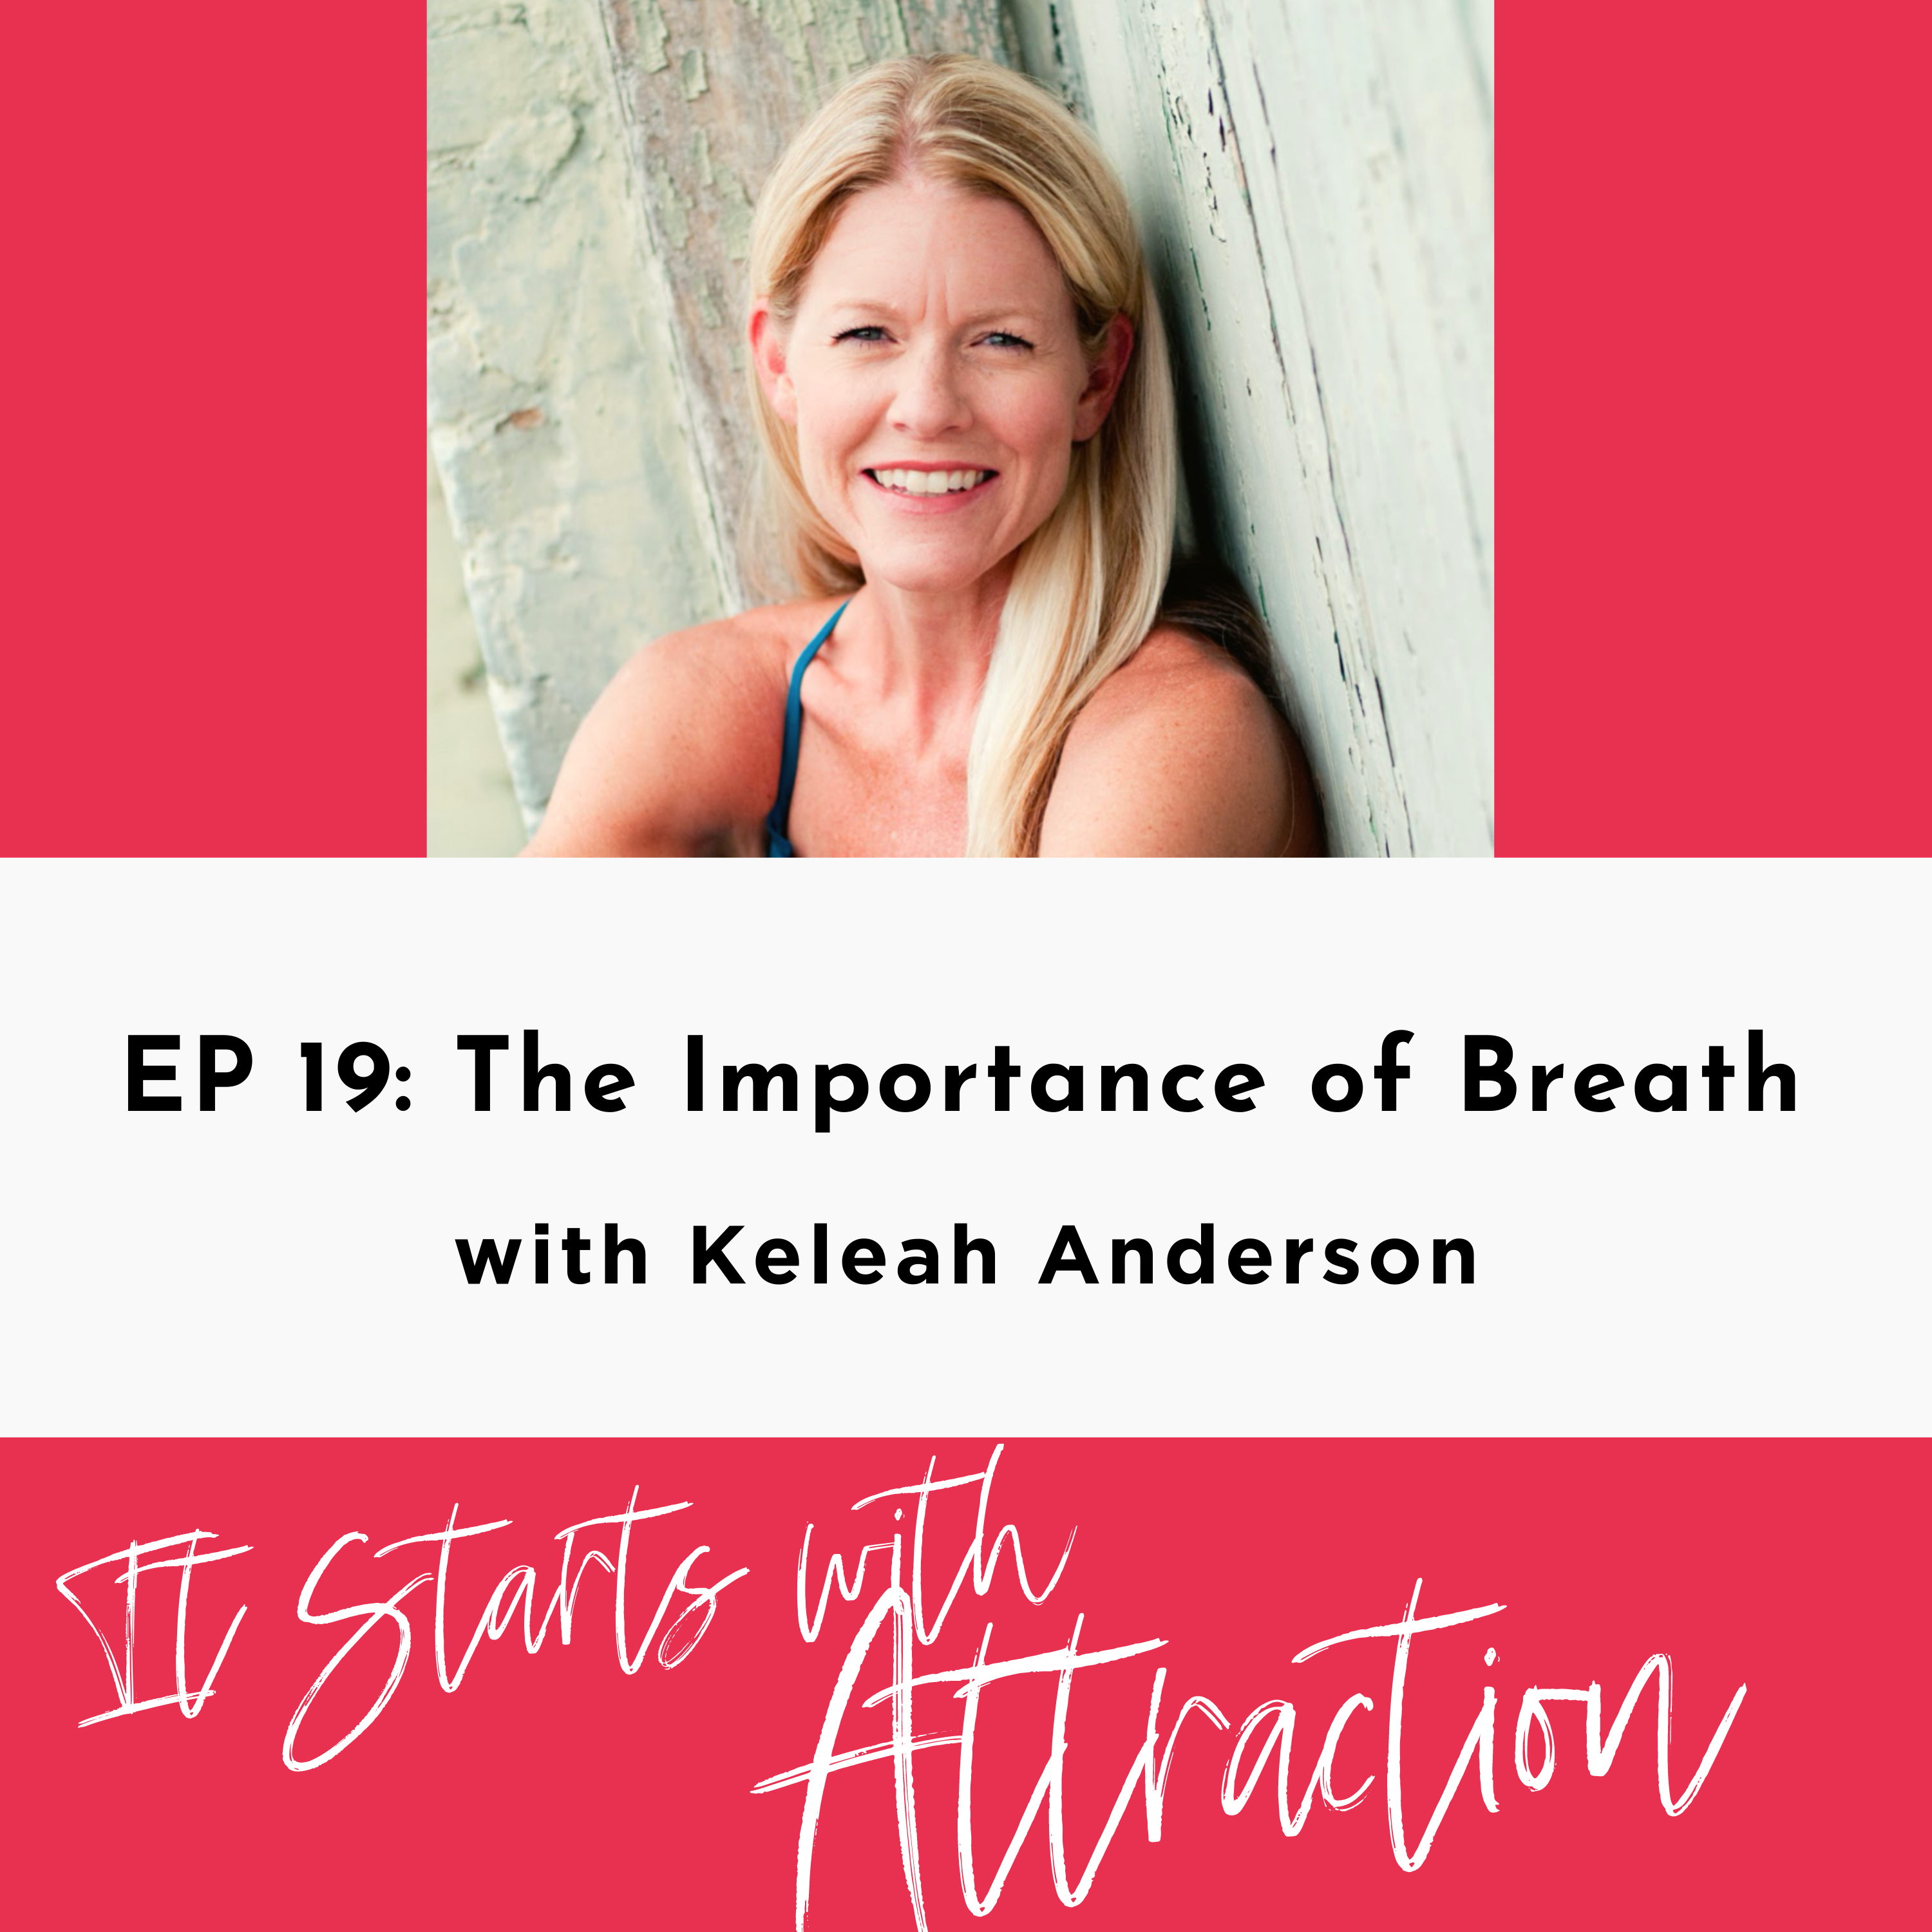 The Importance of Breath